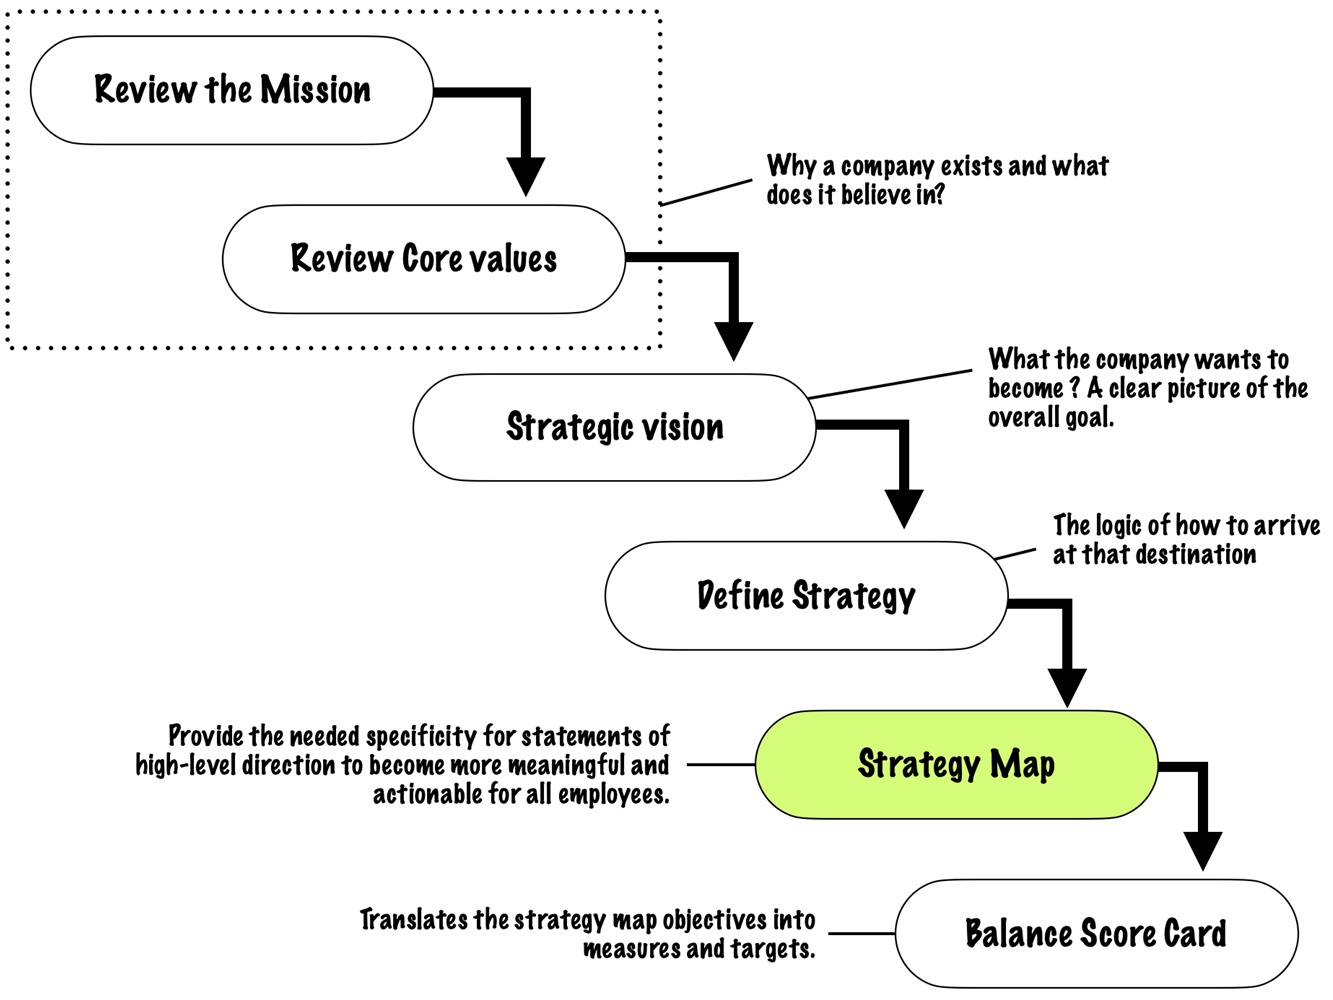 he top-down approach to building Strategy Maps